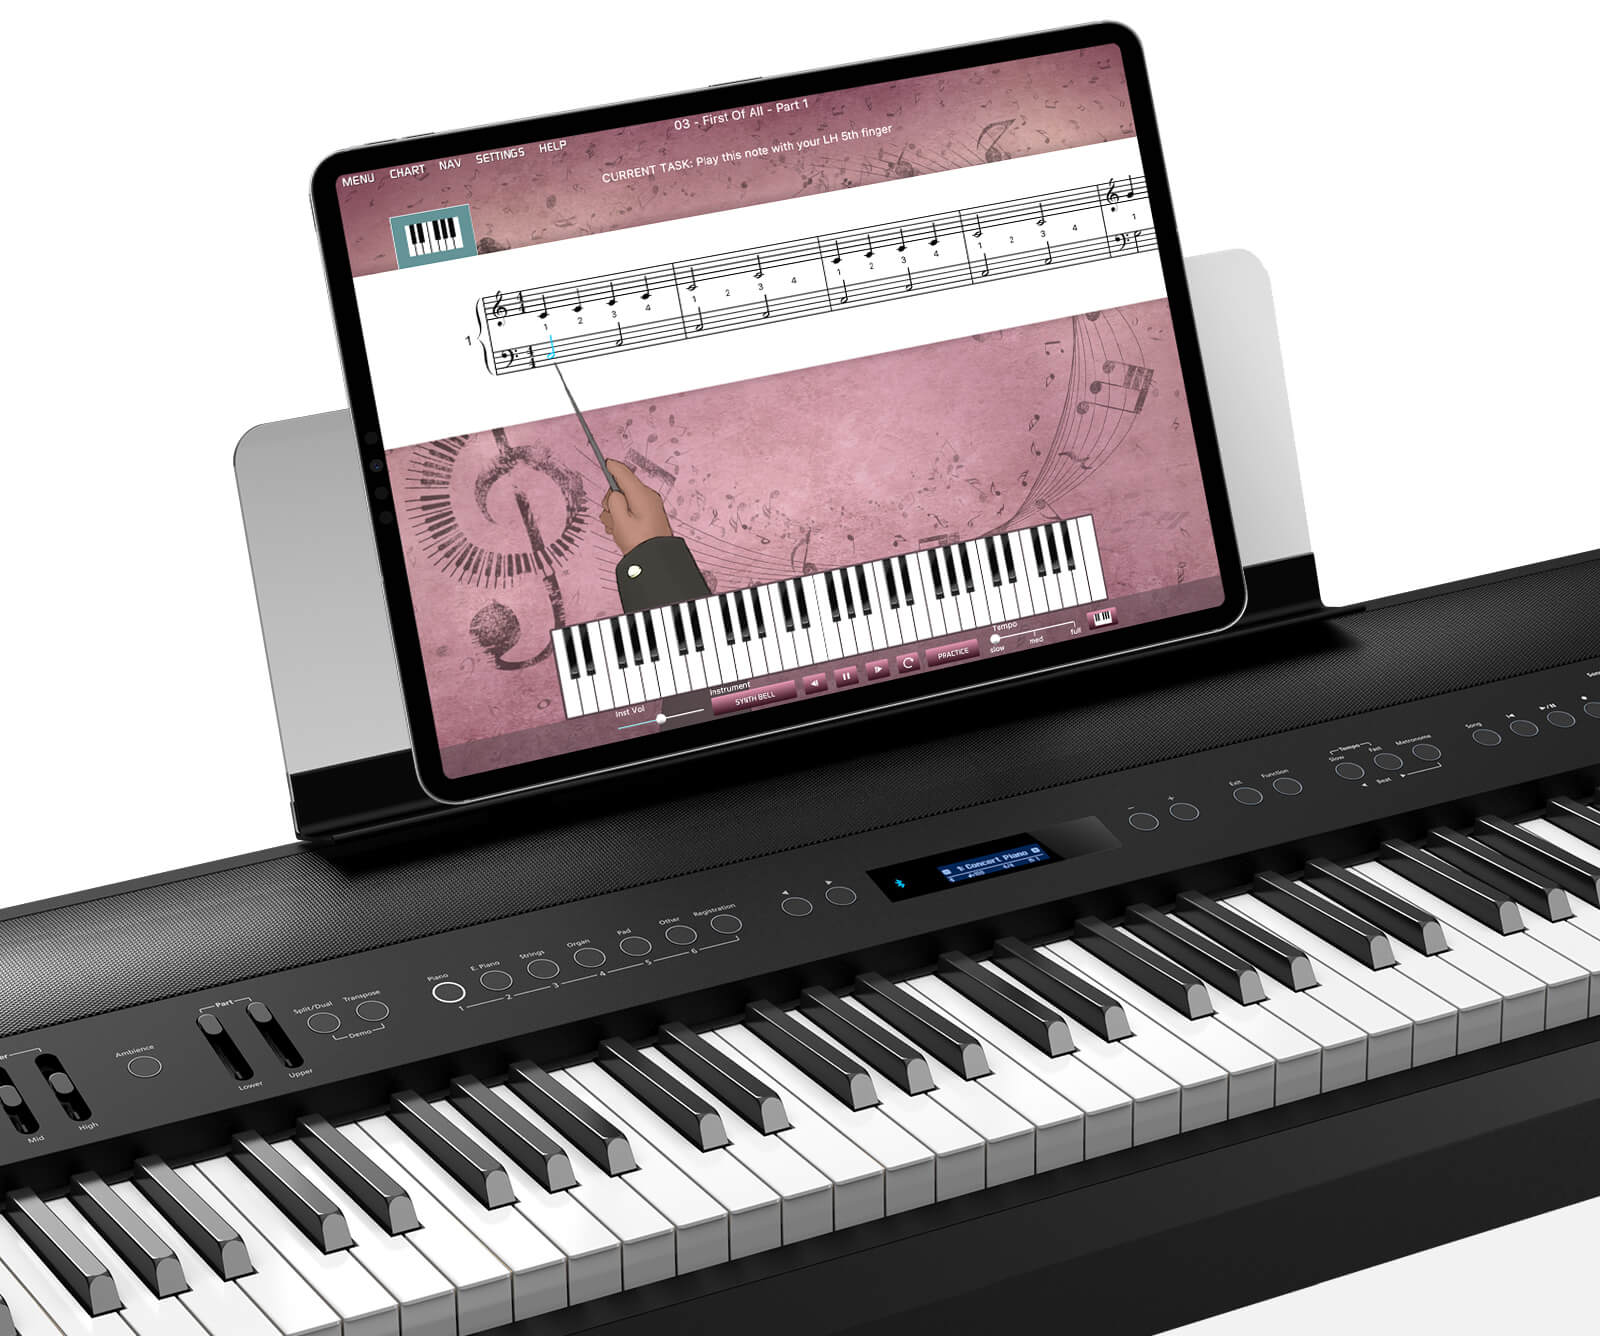 adults piano lessons app on ipad with MIDI piano keyboard